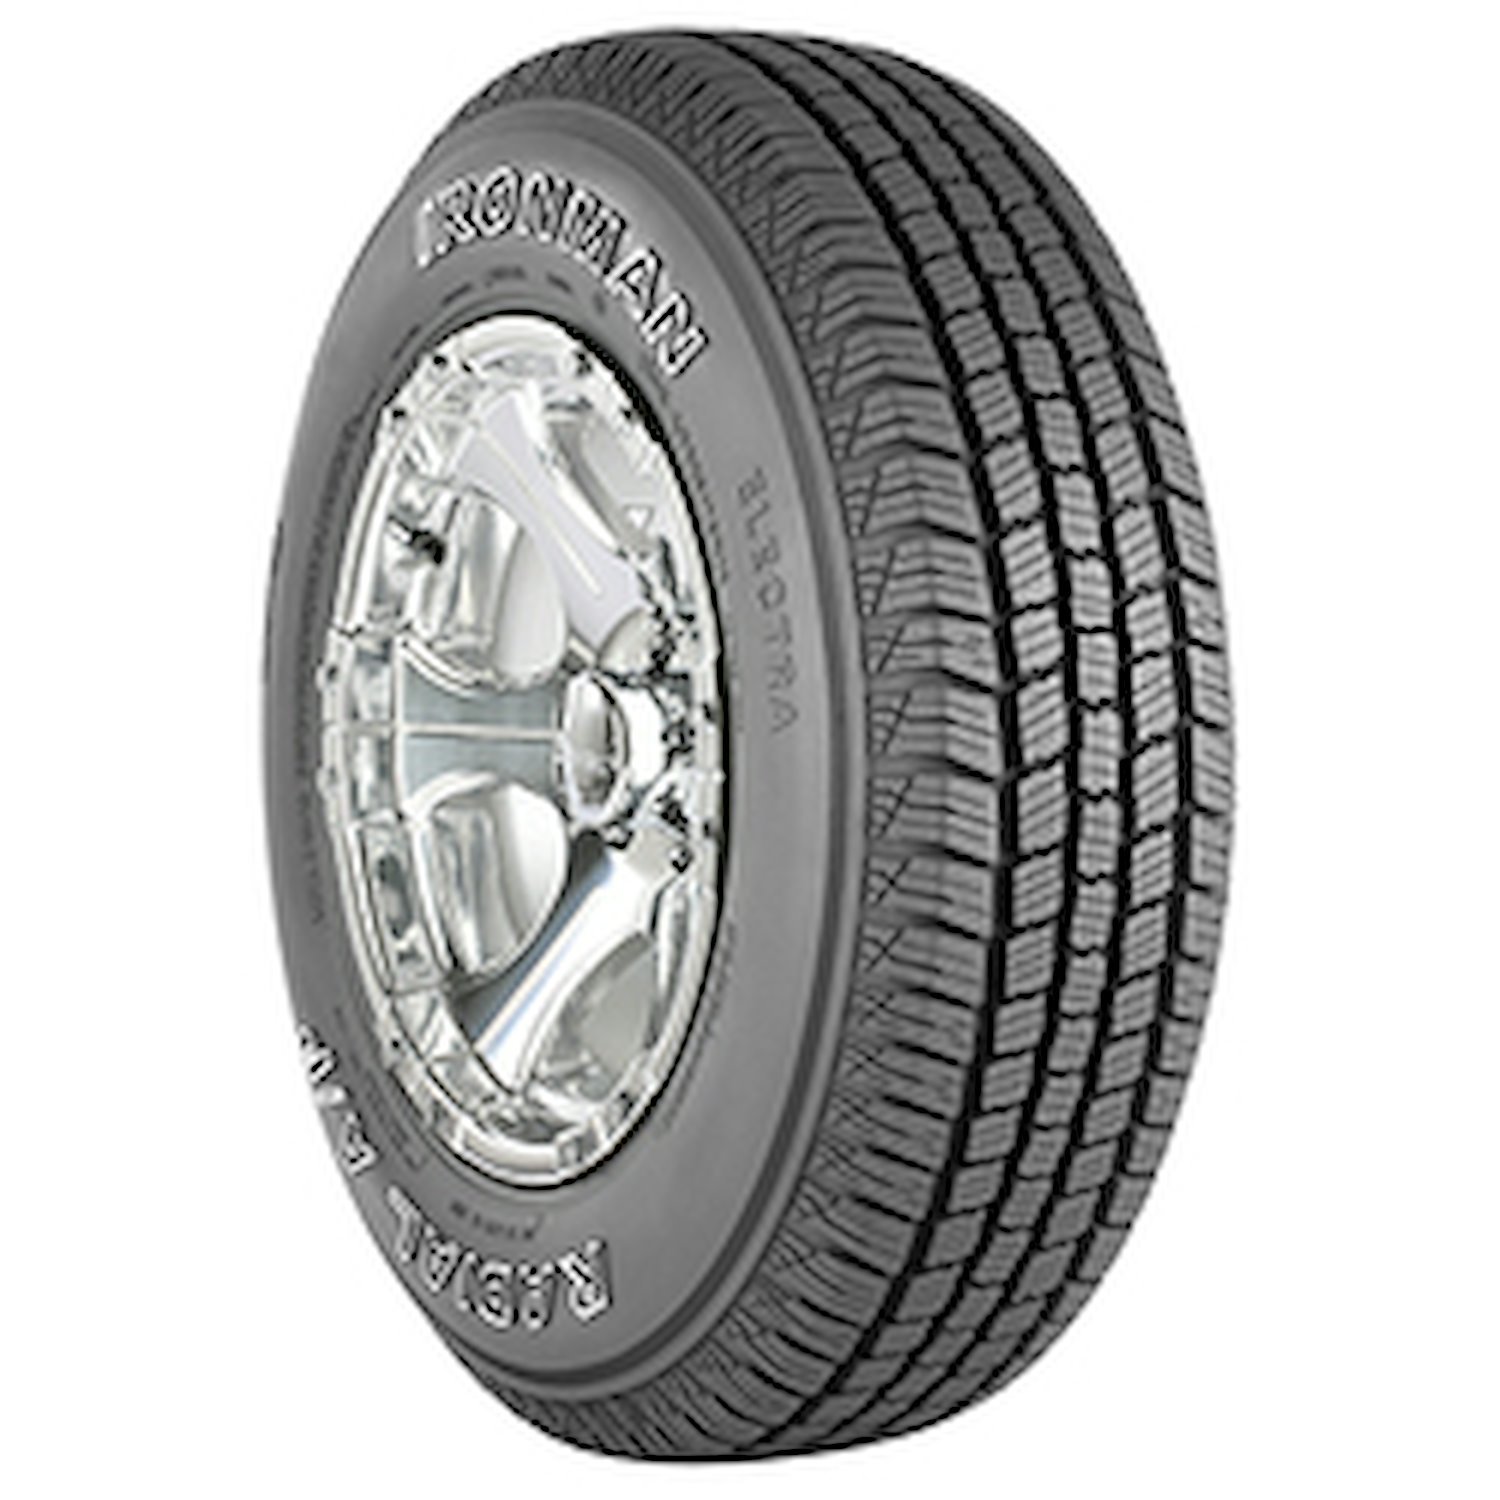 Radial A/P Tire, 245/65R17 107T